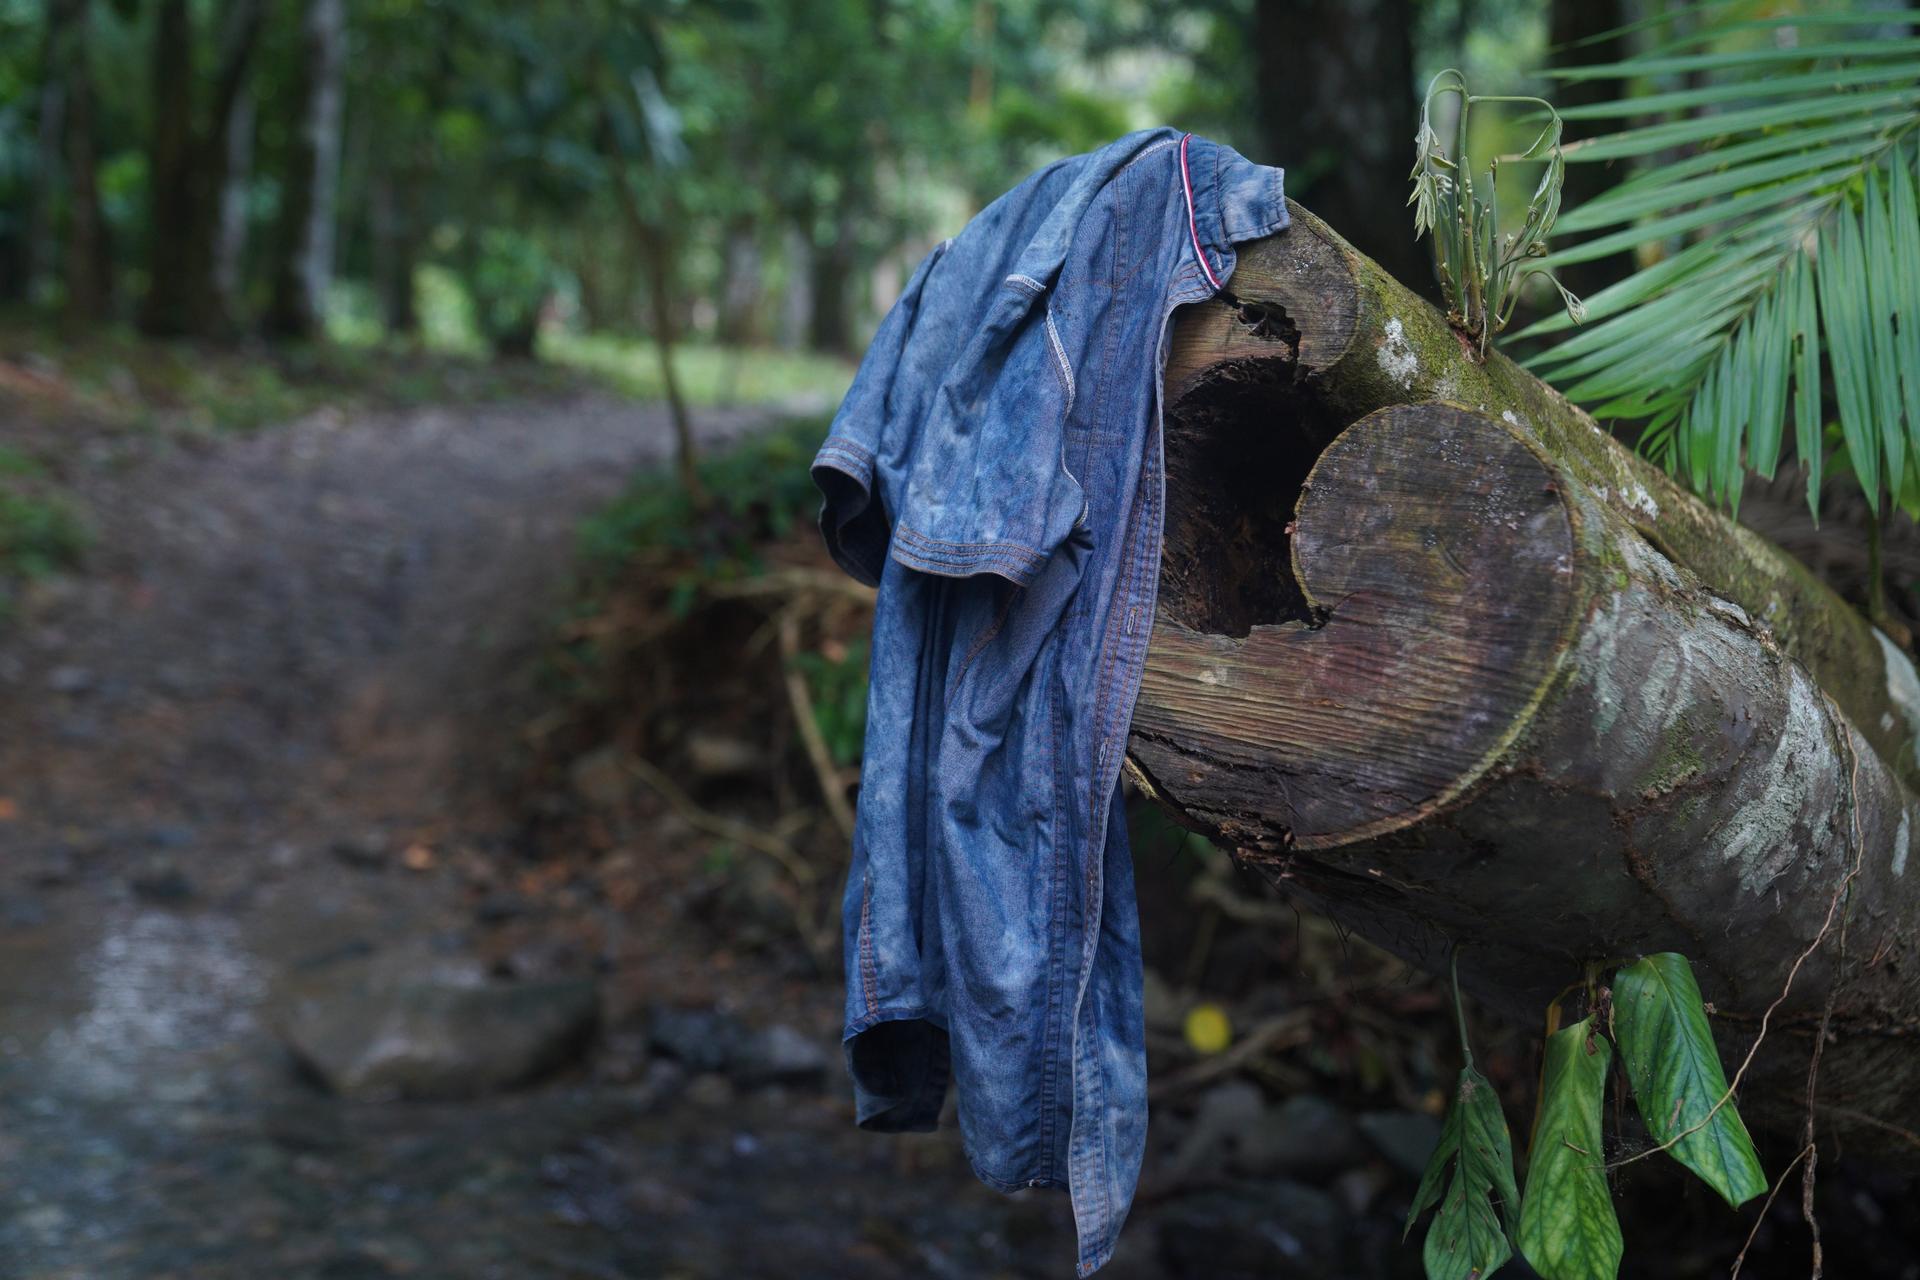 Migrants start to shed some of their belongings as they begin to trek through the Darien Gap